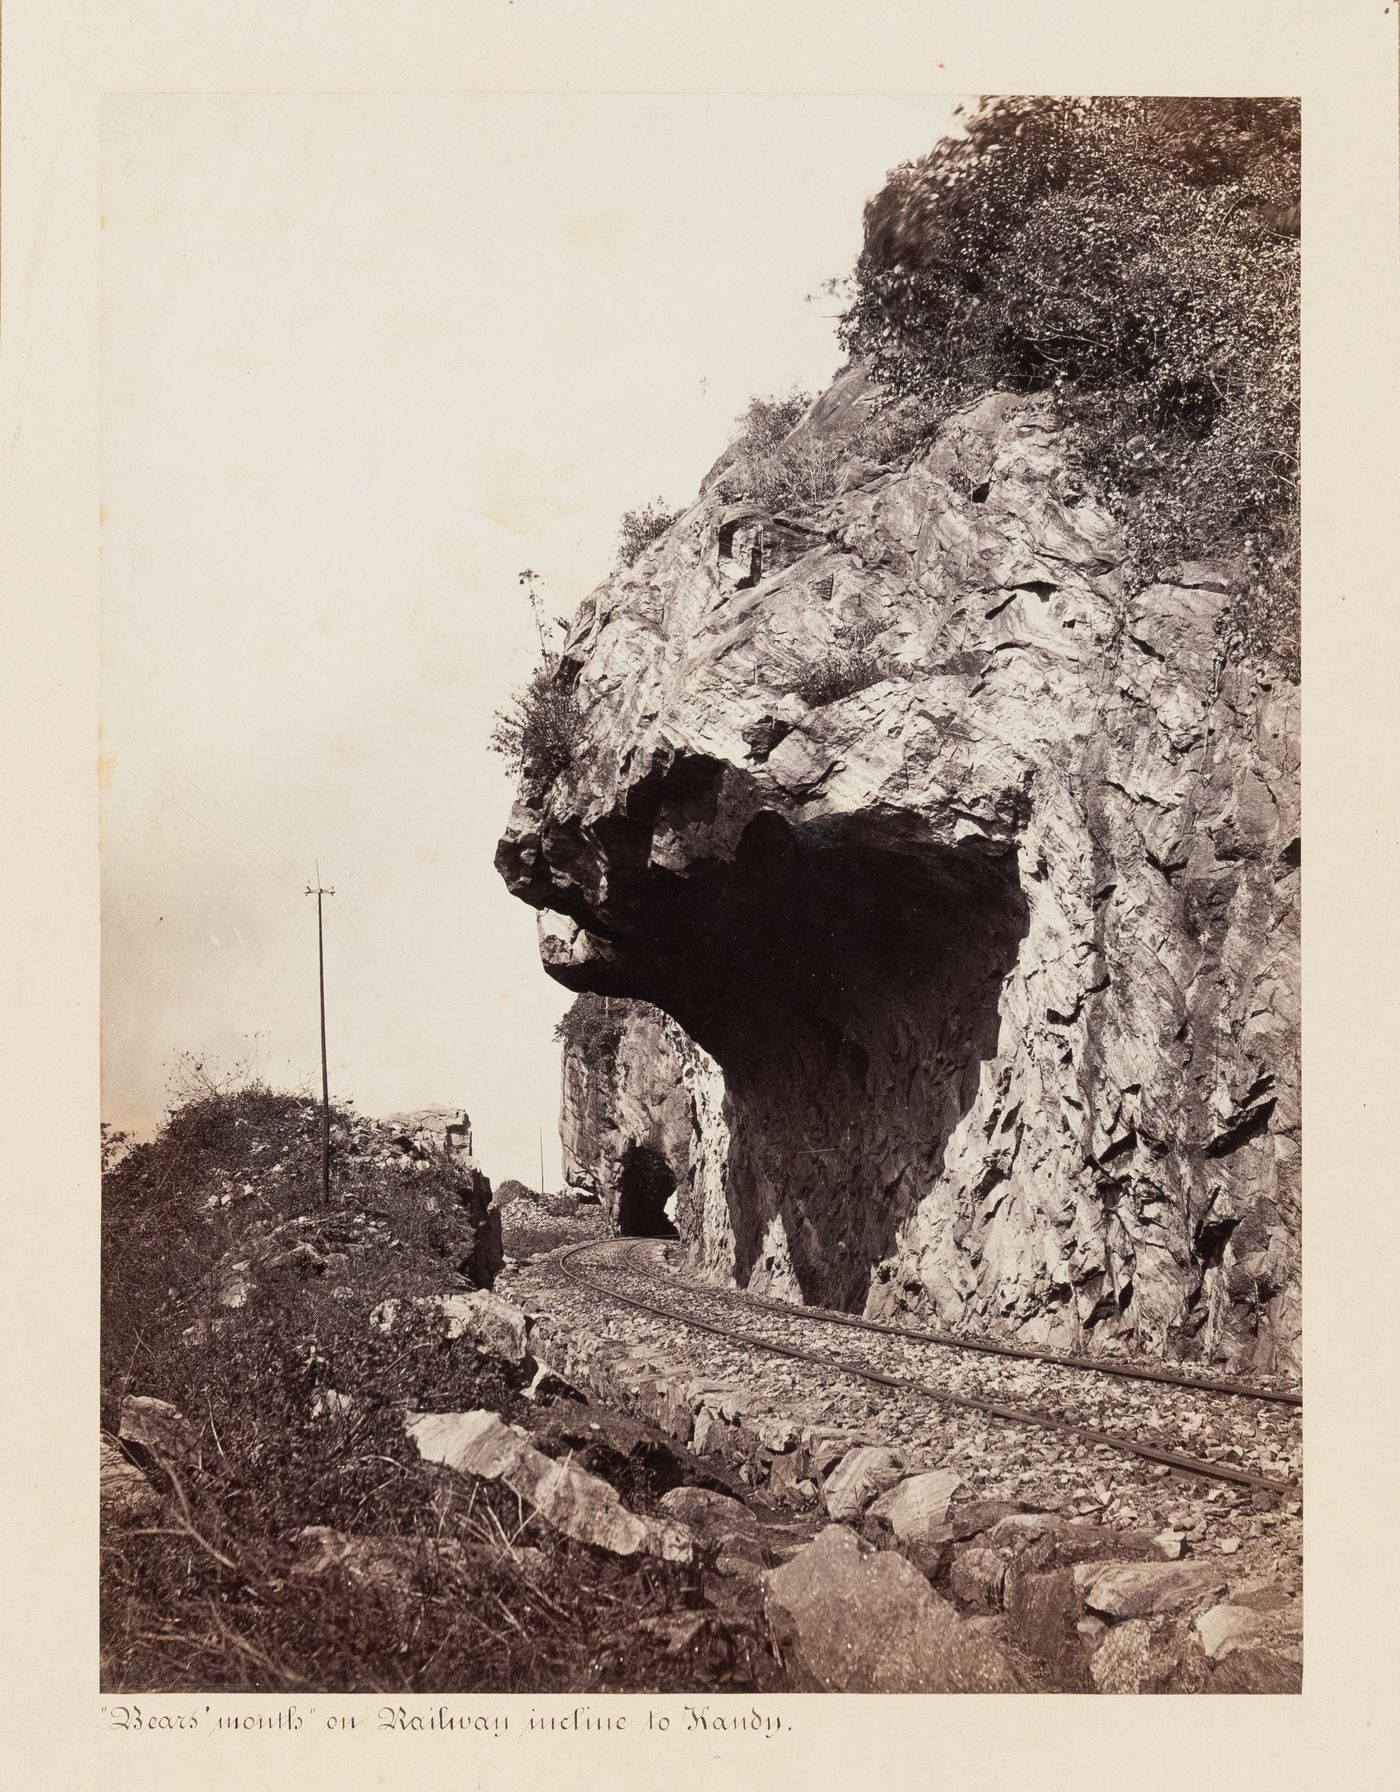 View of the "Bears' Mouth" on the Colombo-Kandy Railway with a tunnel in the background, possibly Tunnel No. 9, Ceylon (now Sri Lanka)